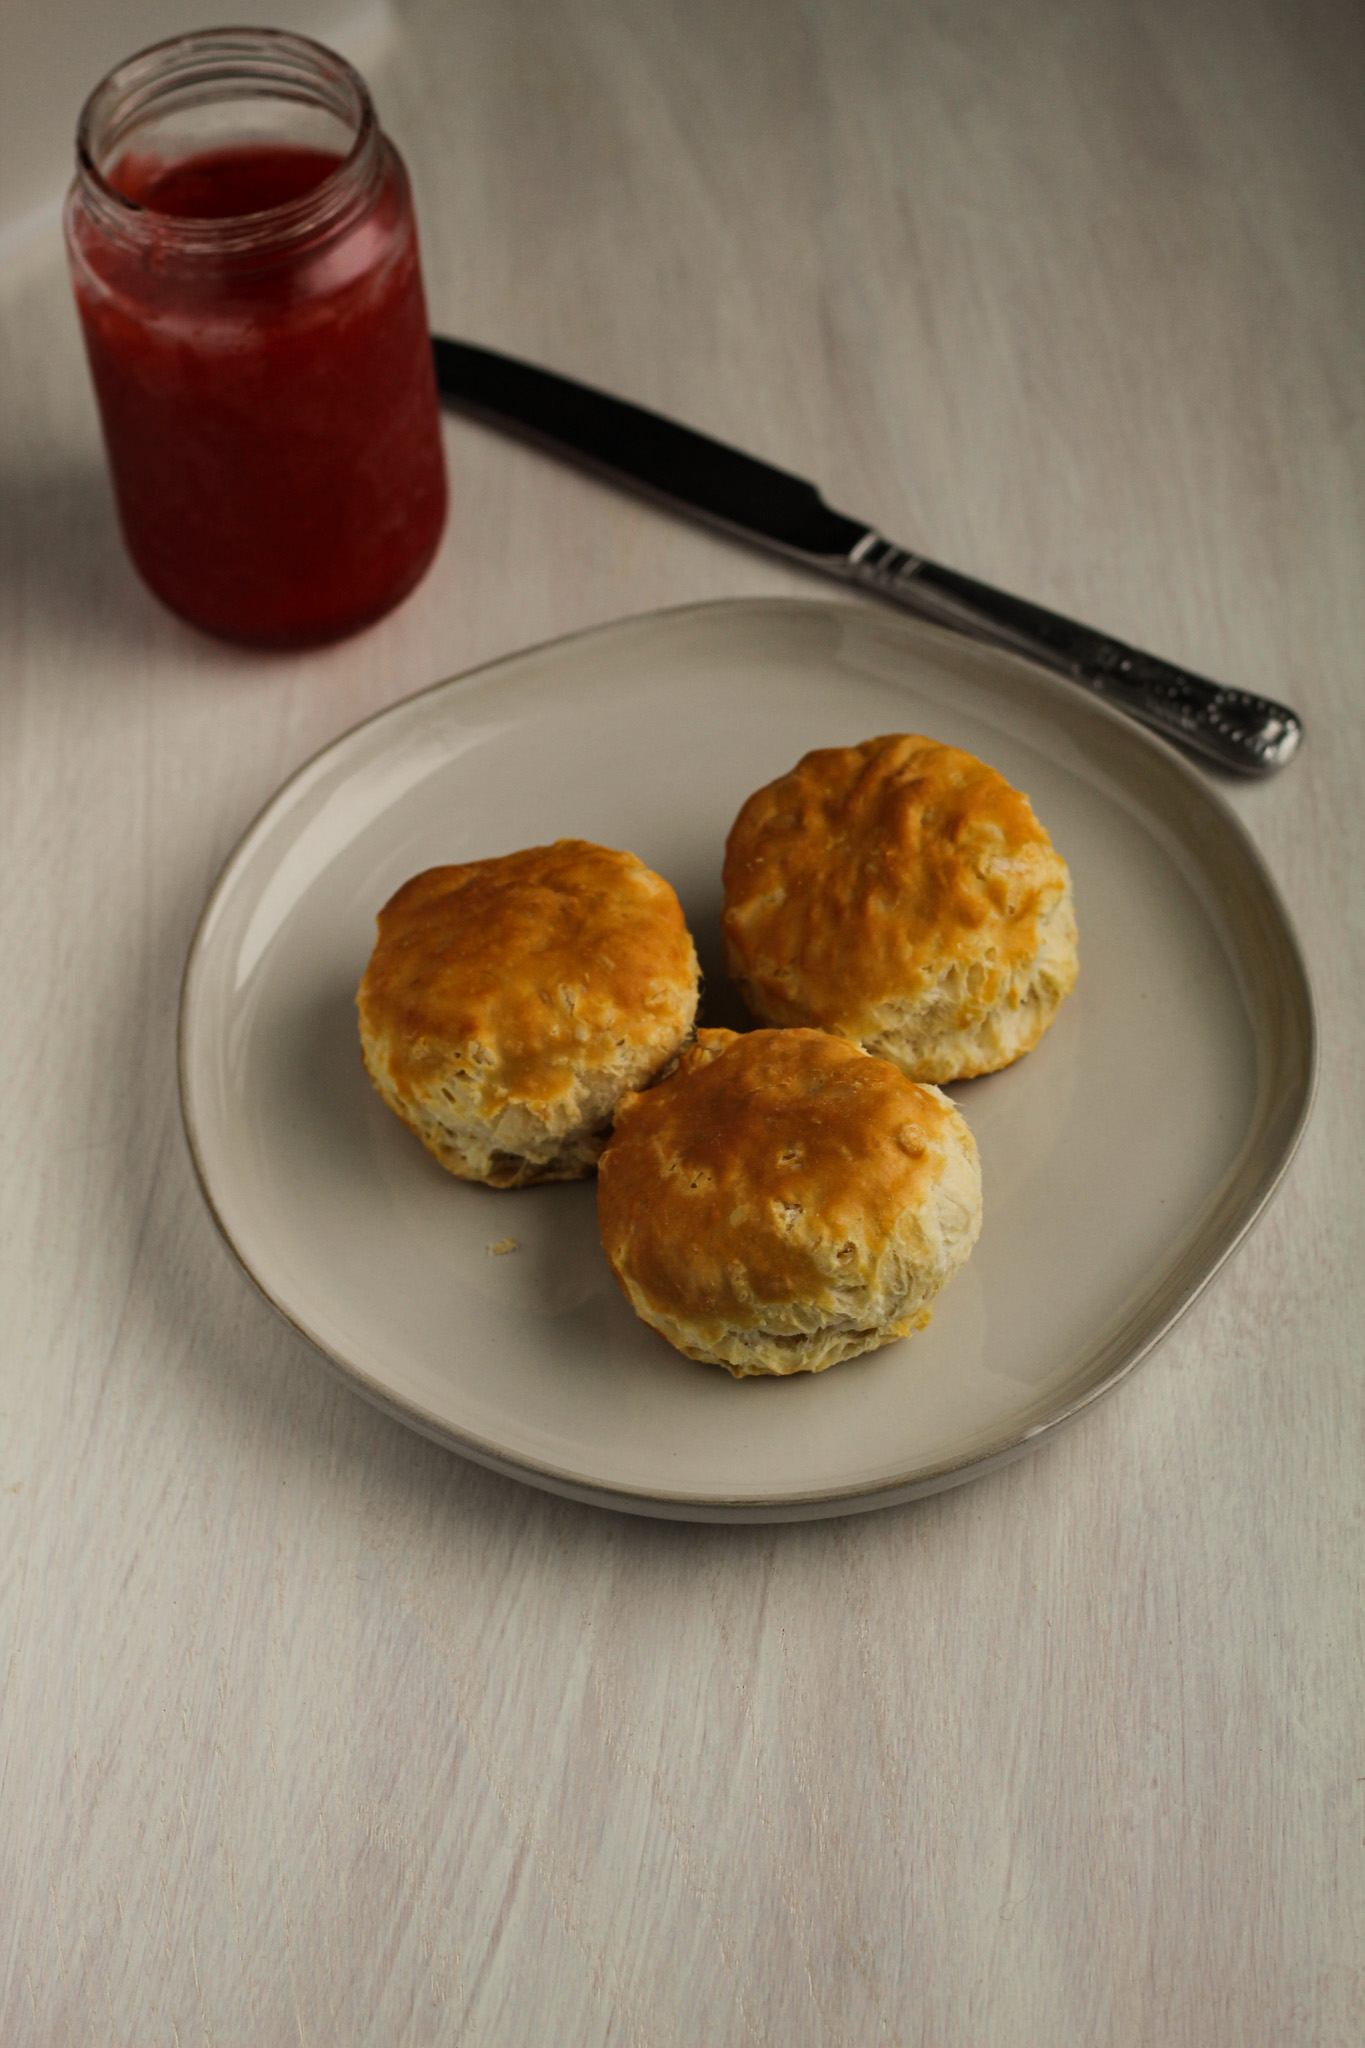 biscuits on plate next to jar of jam and butter knife